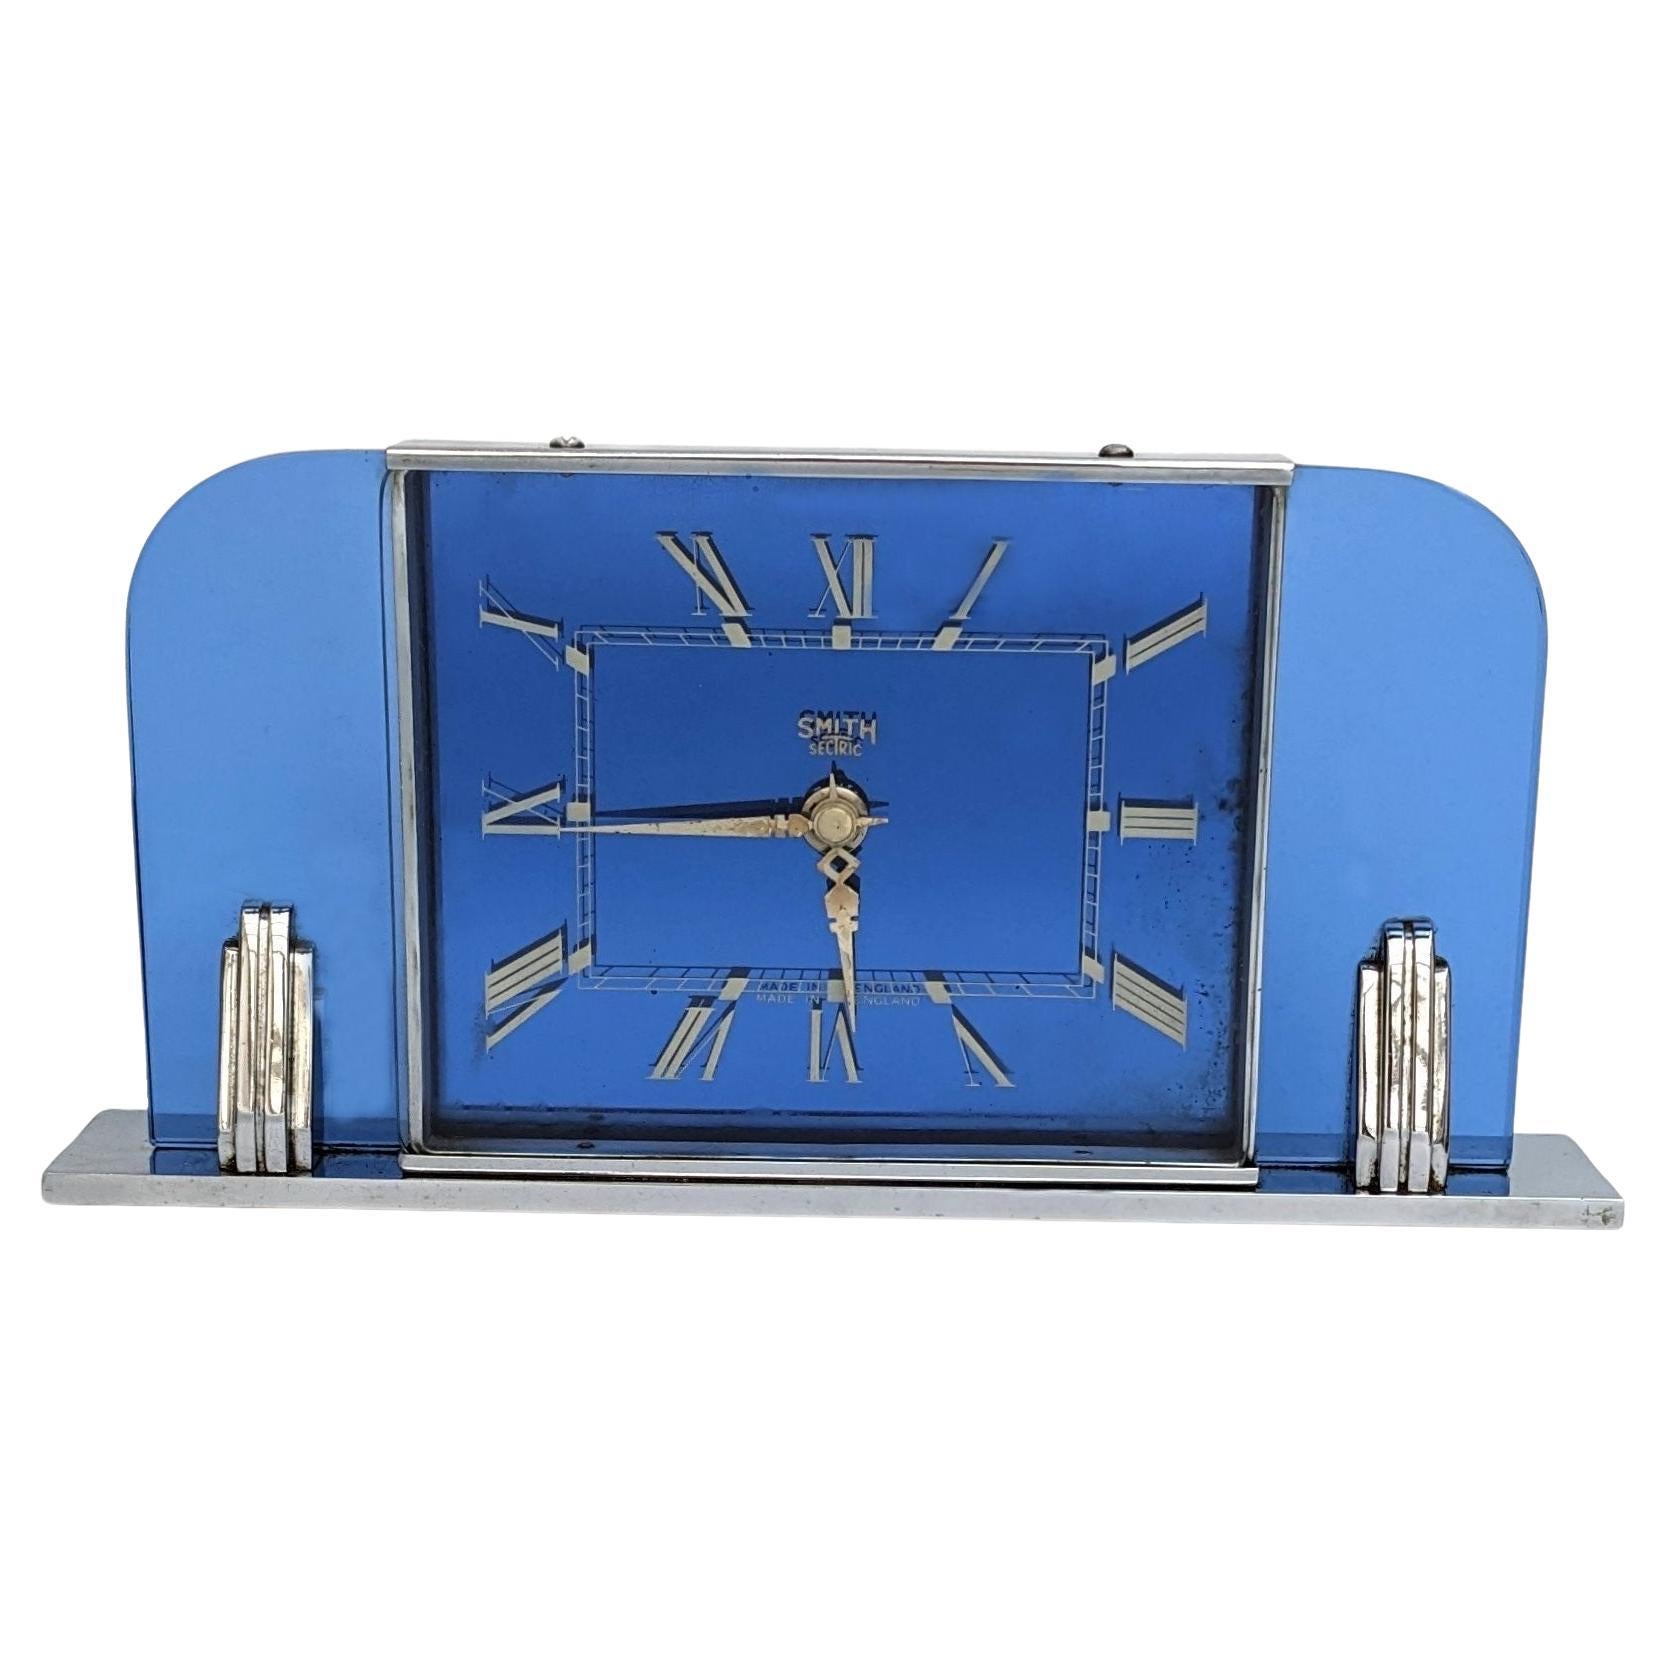 Art Deco Modernist Blue Glass Electric Clock By Smiths Clockmakers, c1930 For Sale